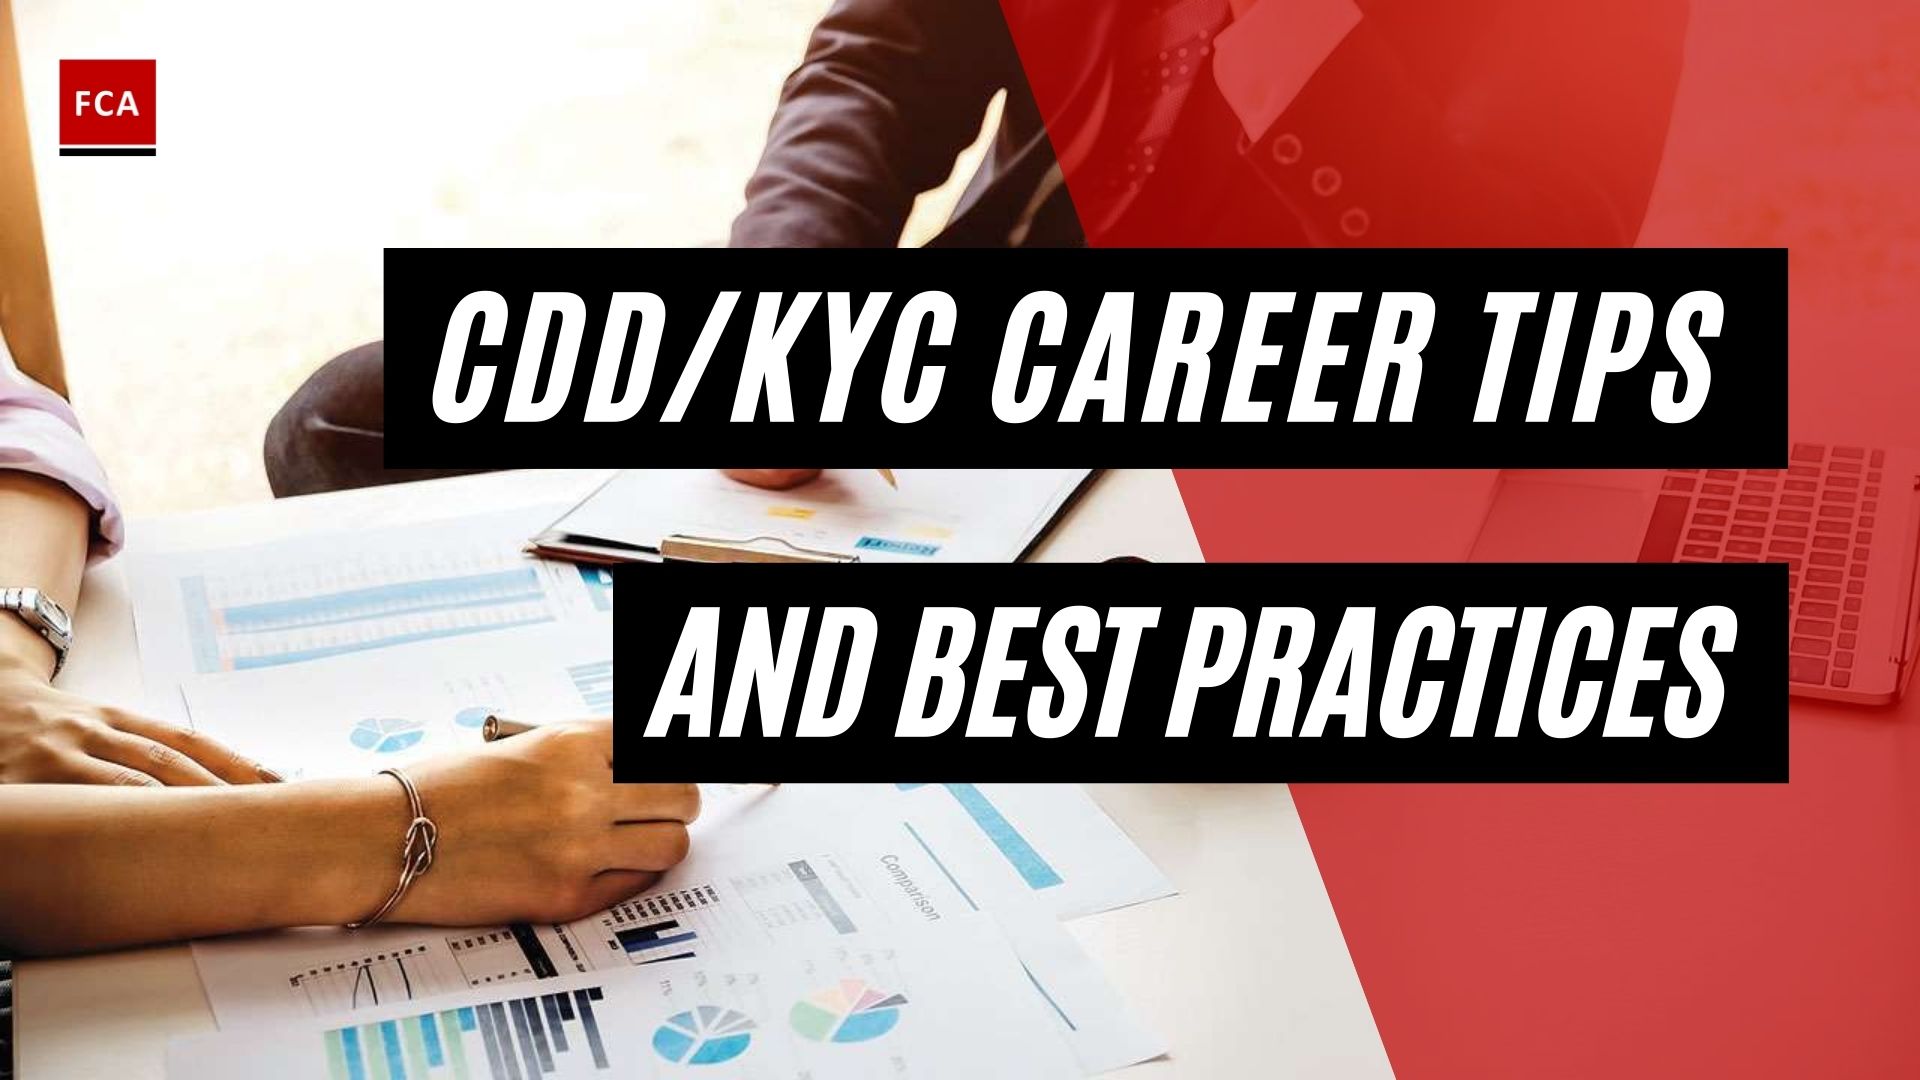 Cdd/Kyc Career Tips And Best Practices